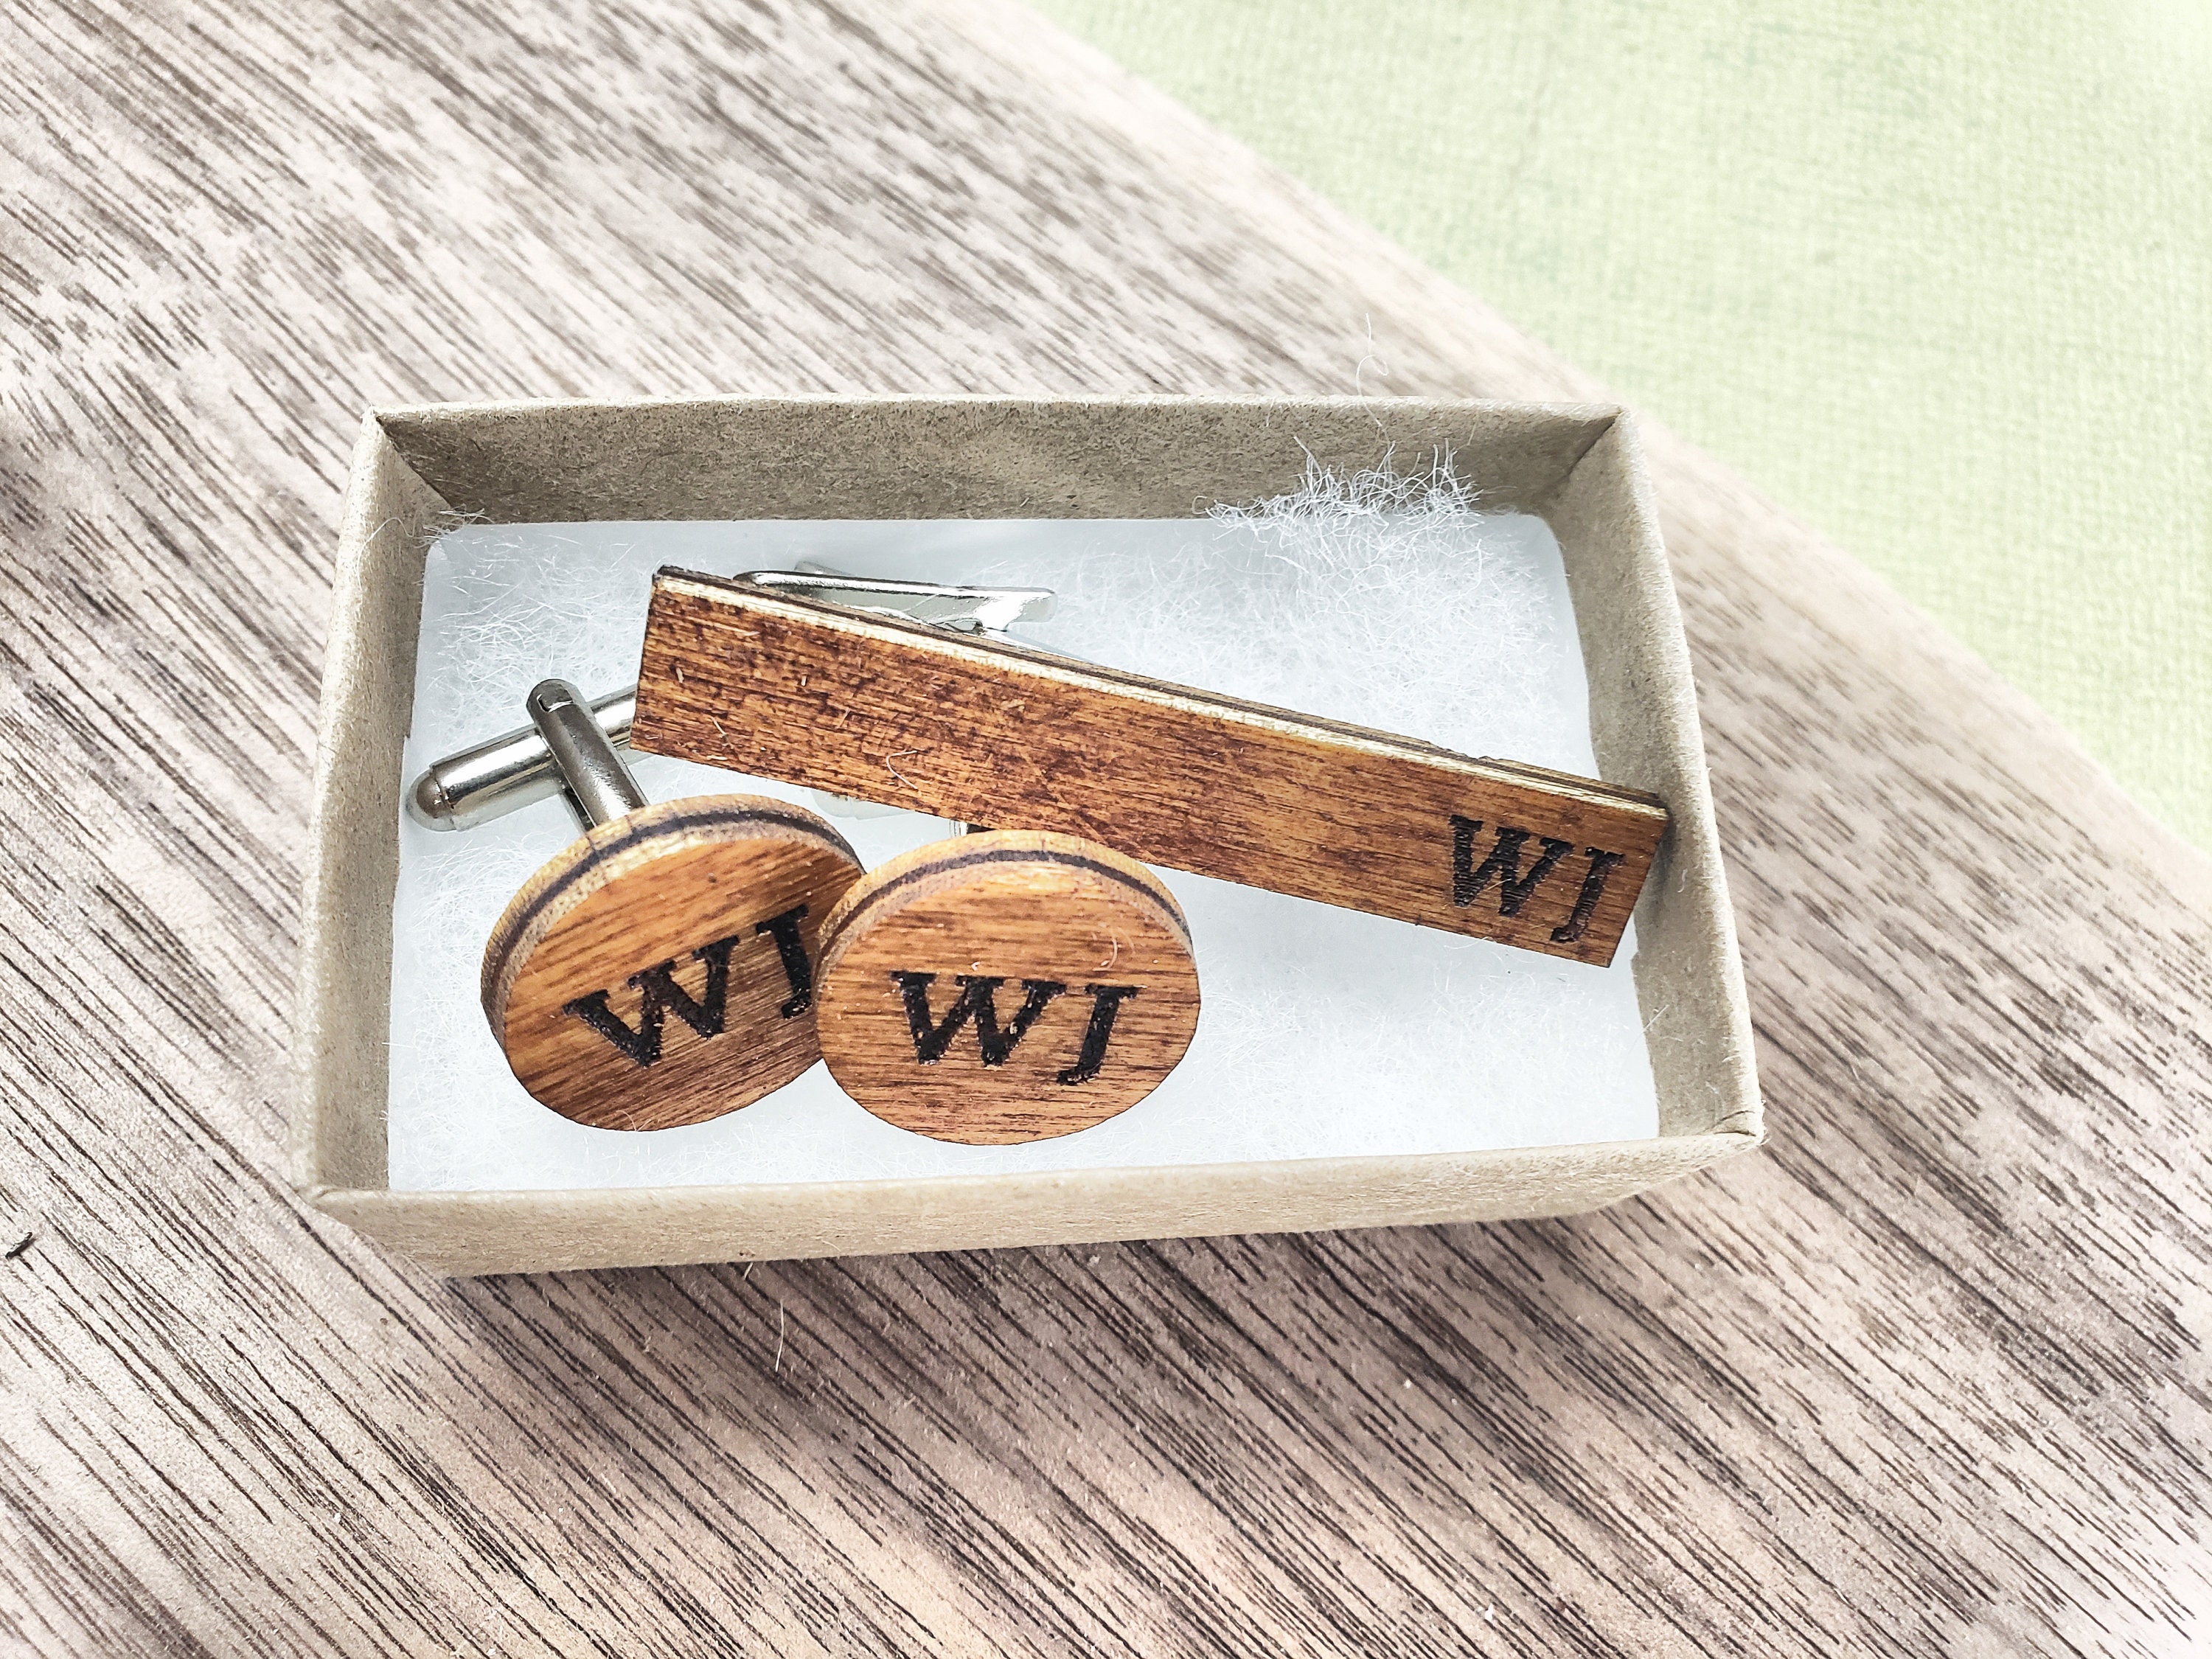 Personalized Engraved Wooden Tie Clip and Cuff link Set 